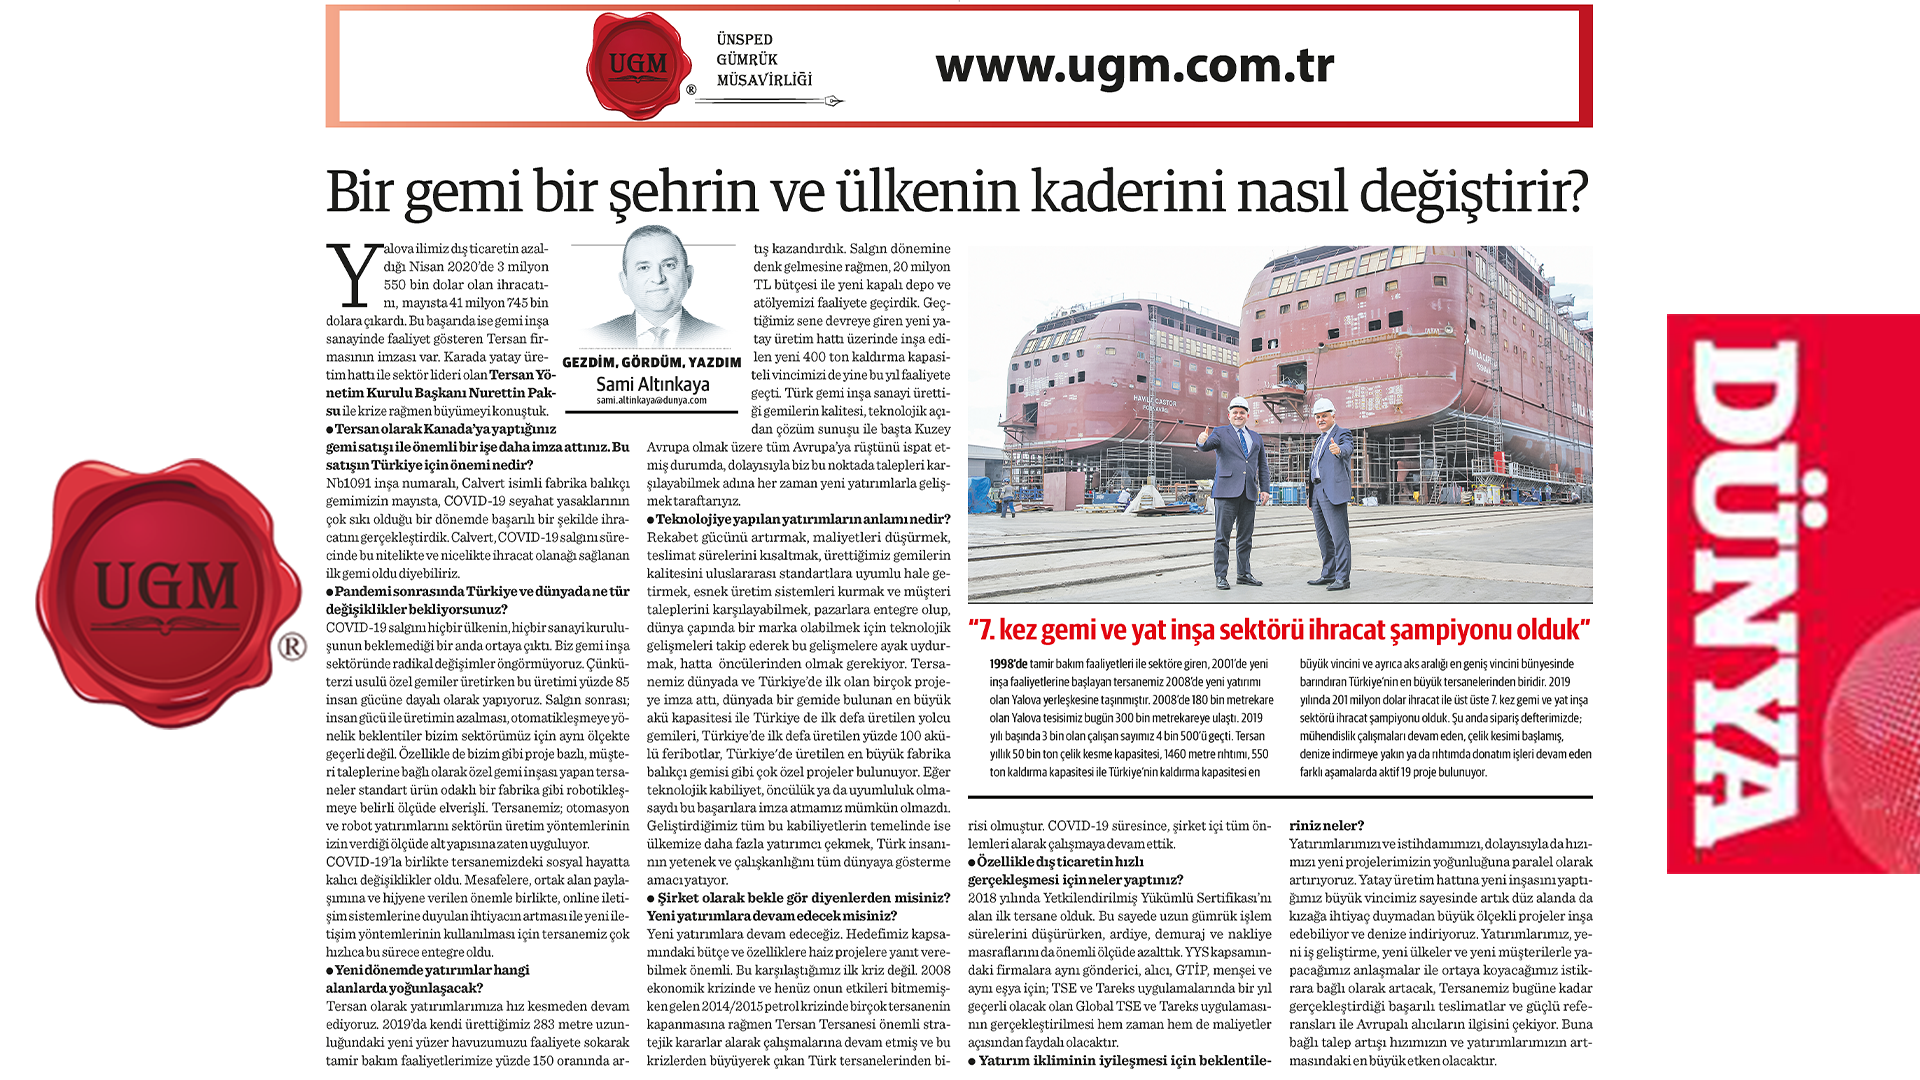 Article of UGM Corporate Communications Director Sami Altınkaya entitled "How does a ship change the fate of a city and country? " was published in the Dünya newspaper on 29.06.2020.